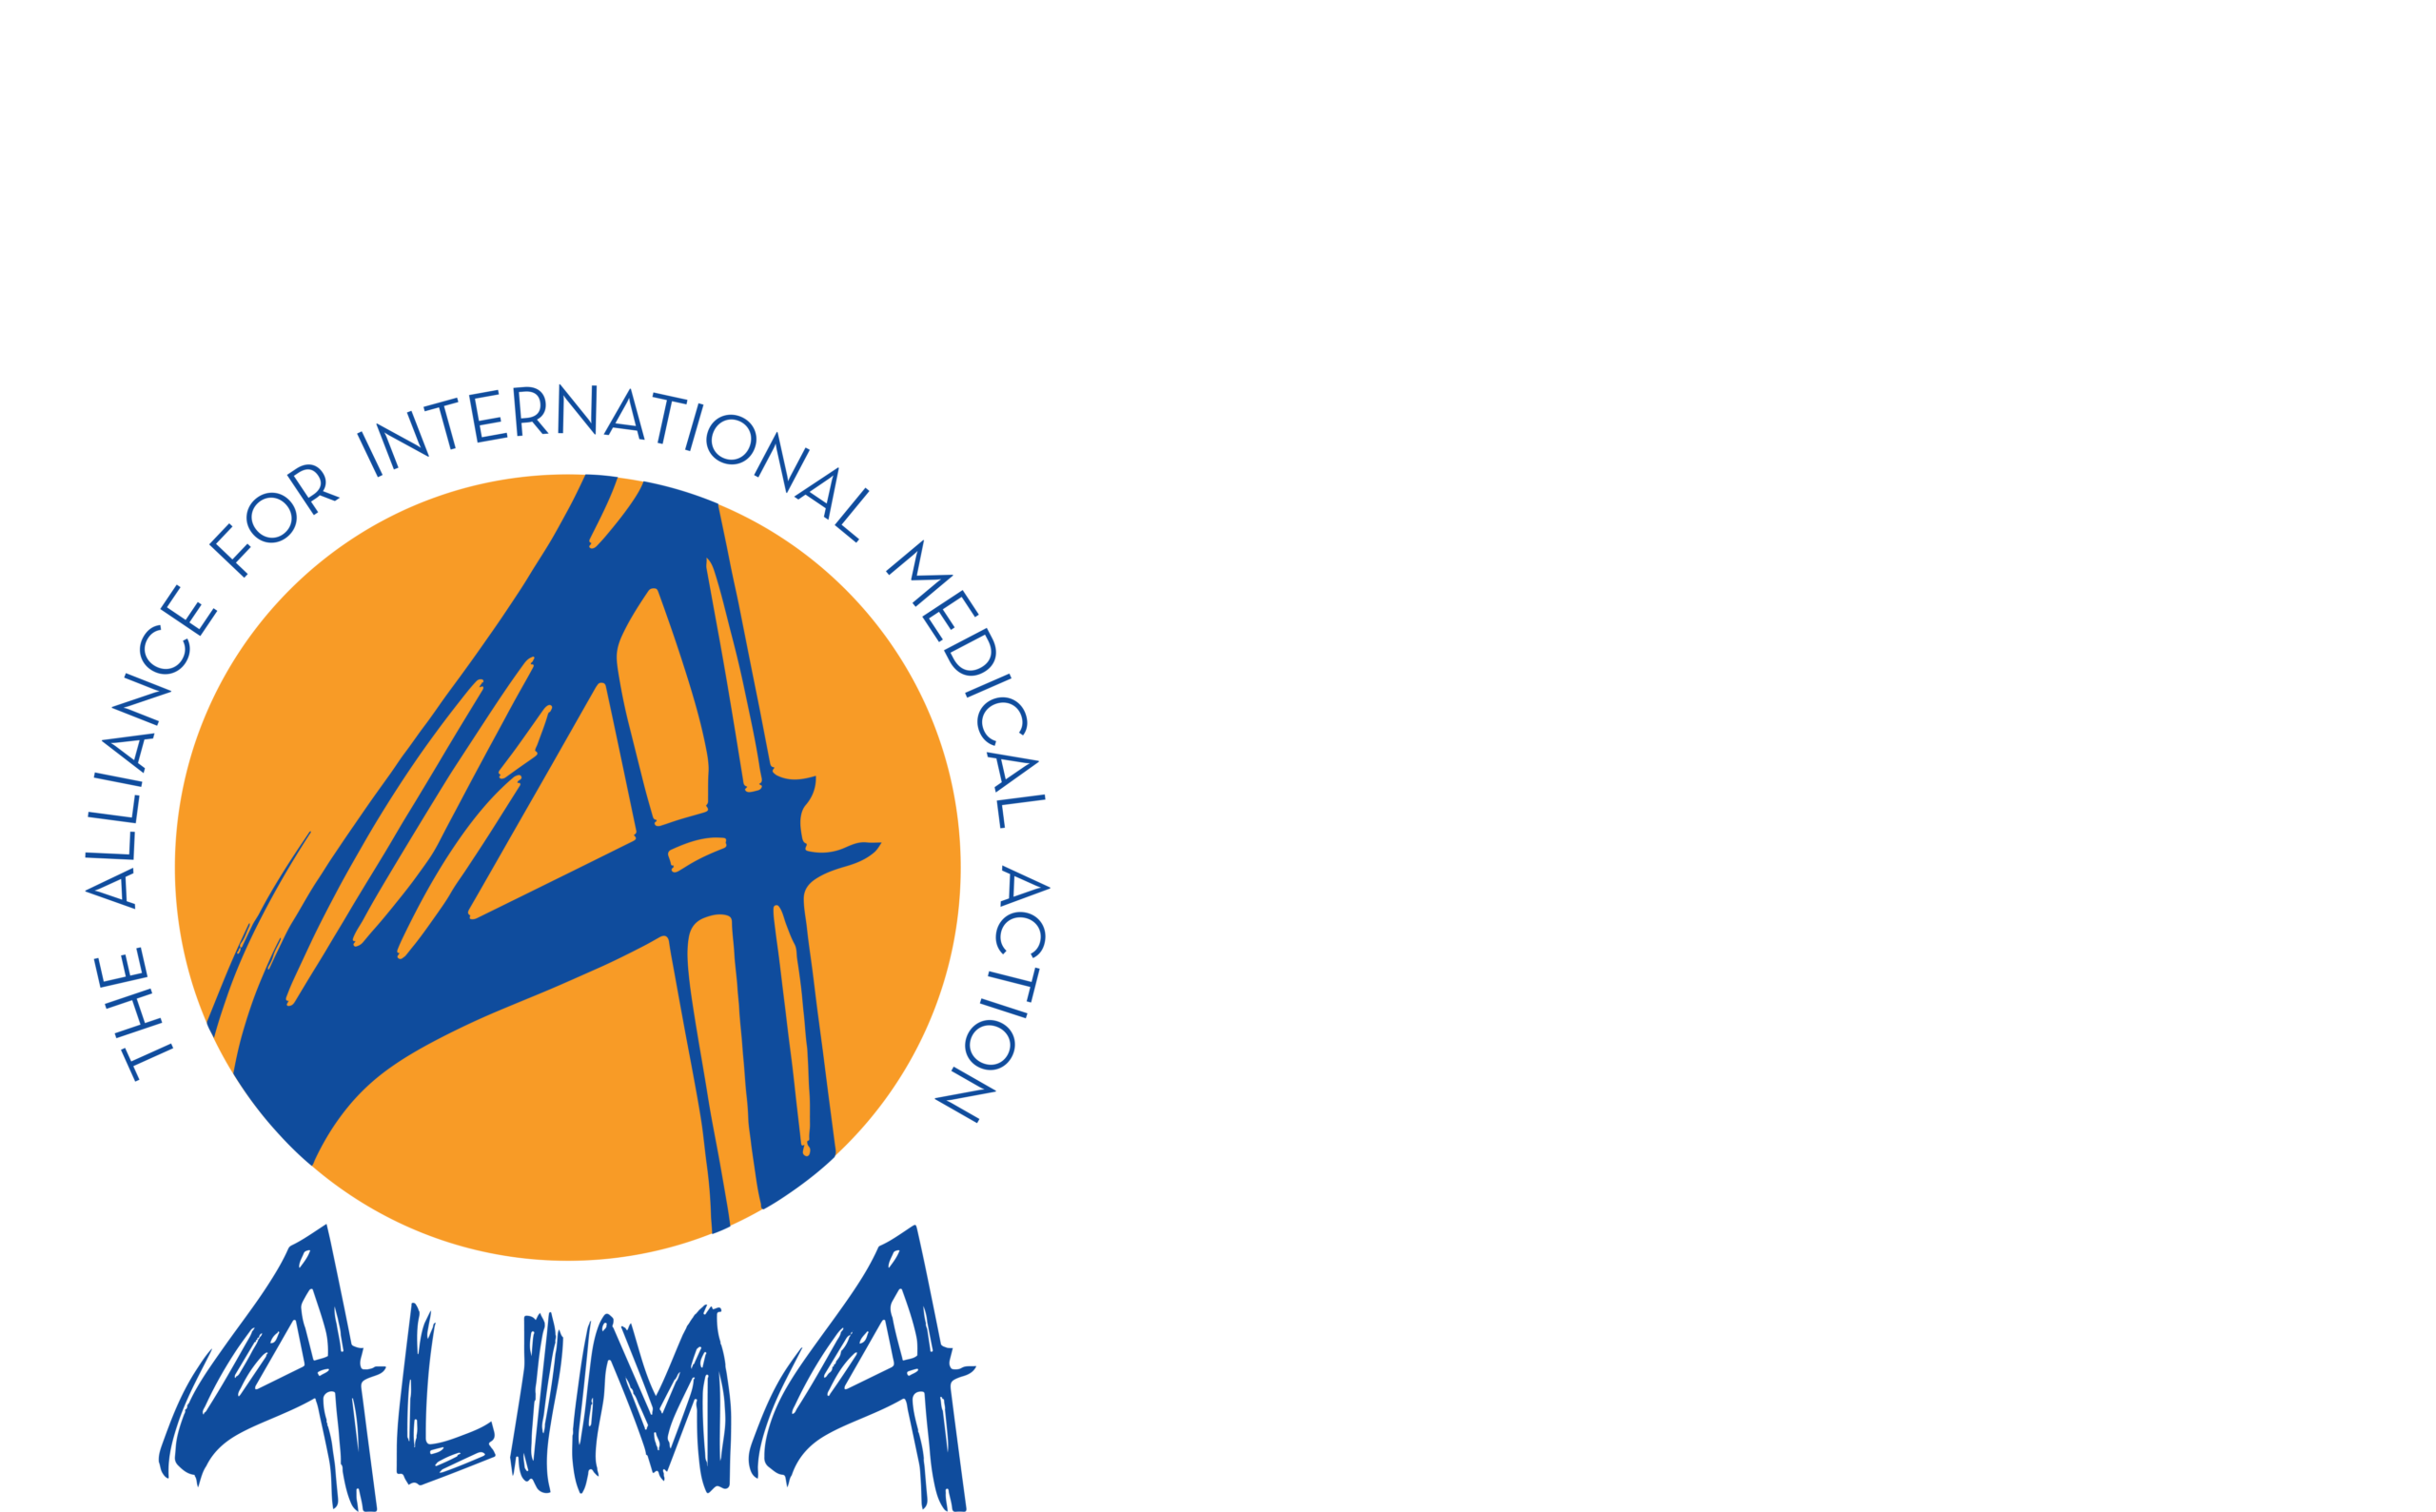 The logo for ALIMA - the alliance for international medical action.